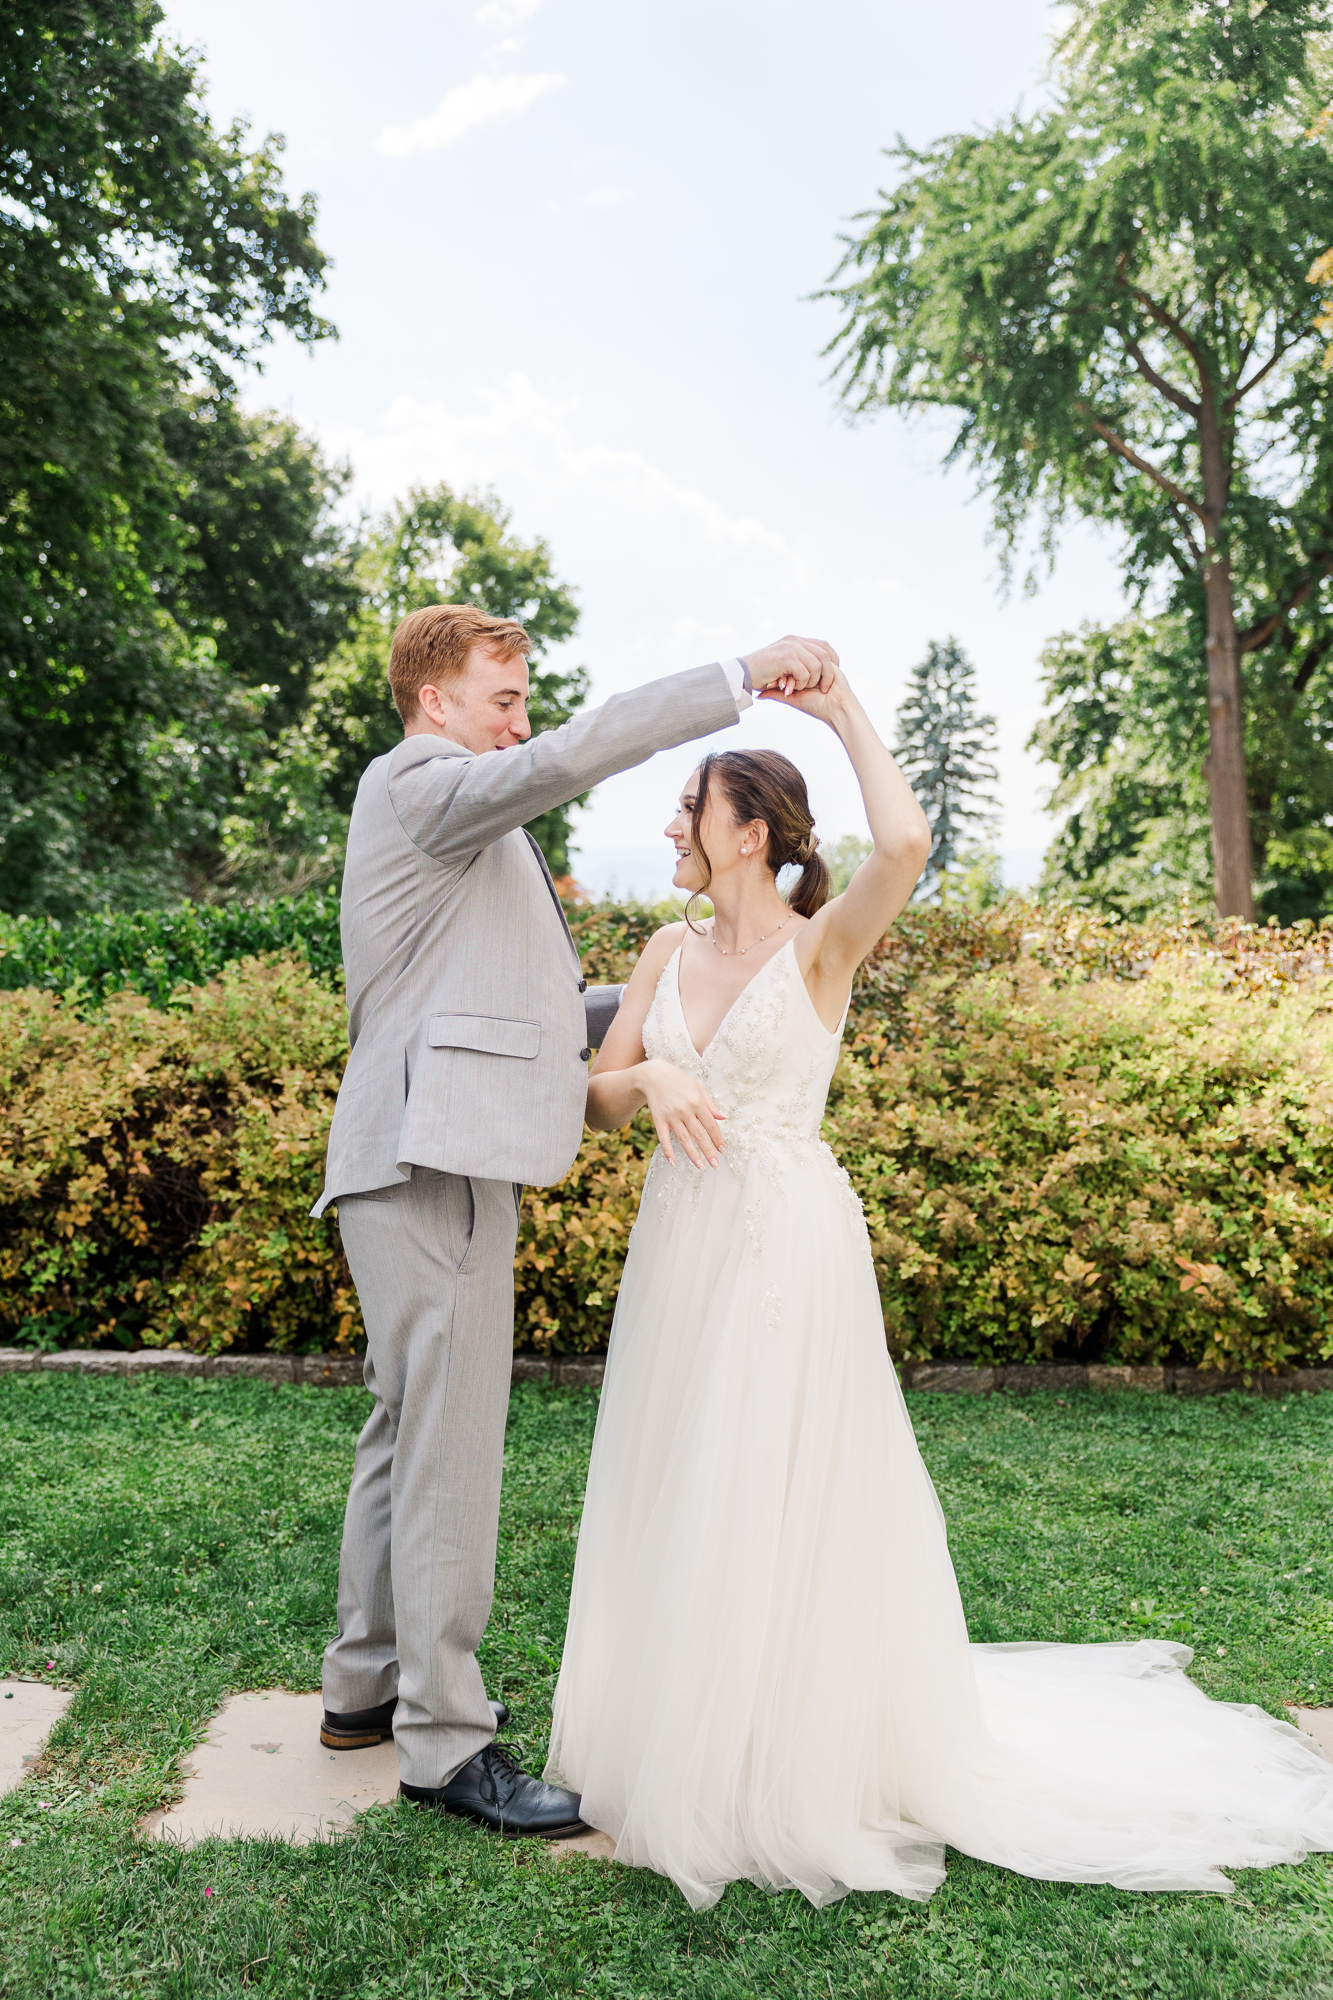 Cheerful Wedding at Briarcliff Manor in Westchester County